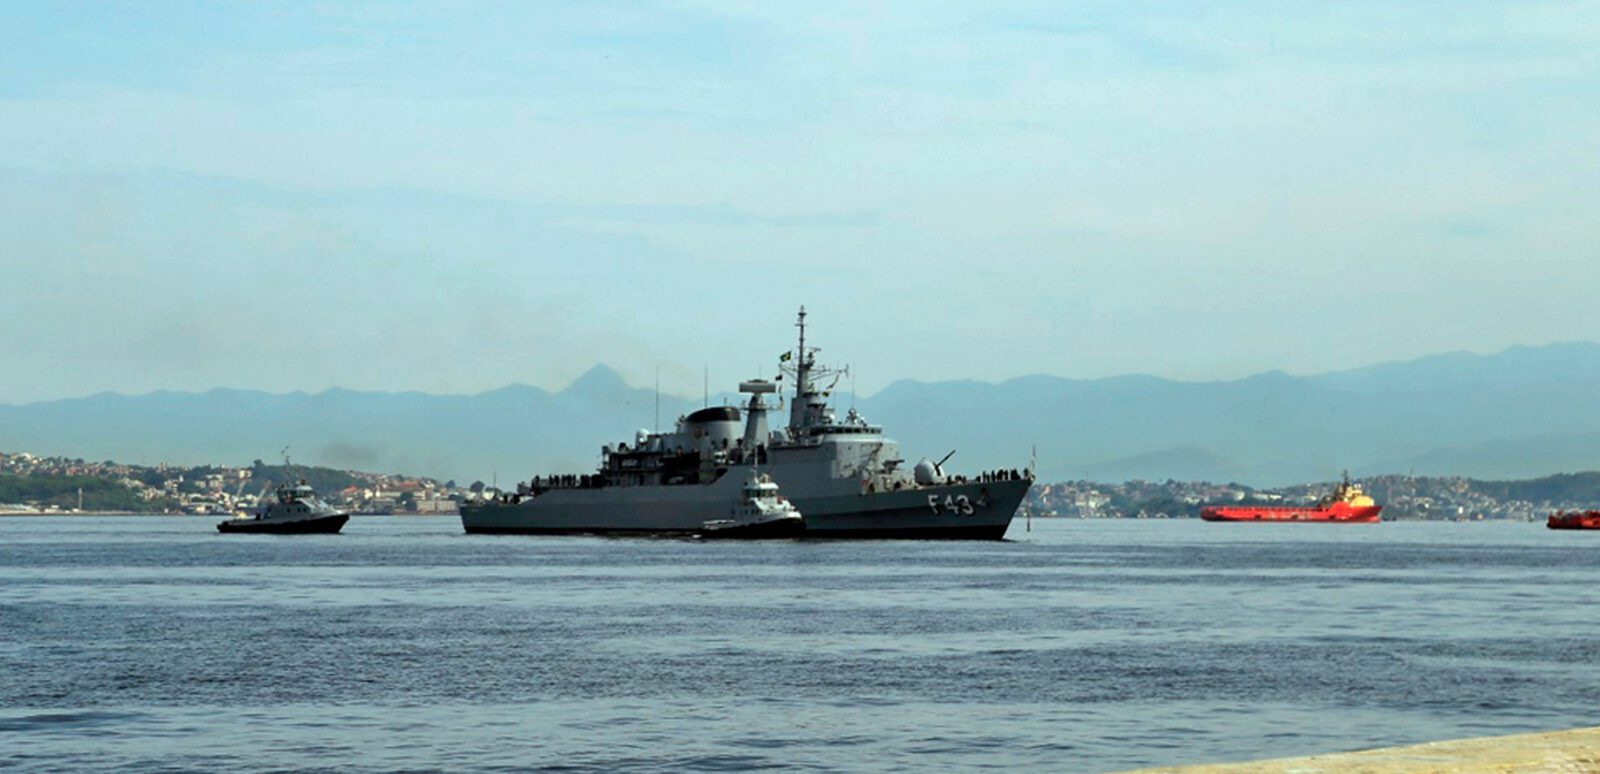 Frigate "Liberal" returns to Brazil after mission in Africa